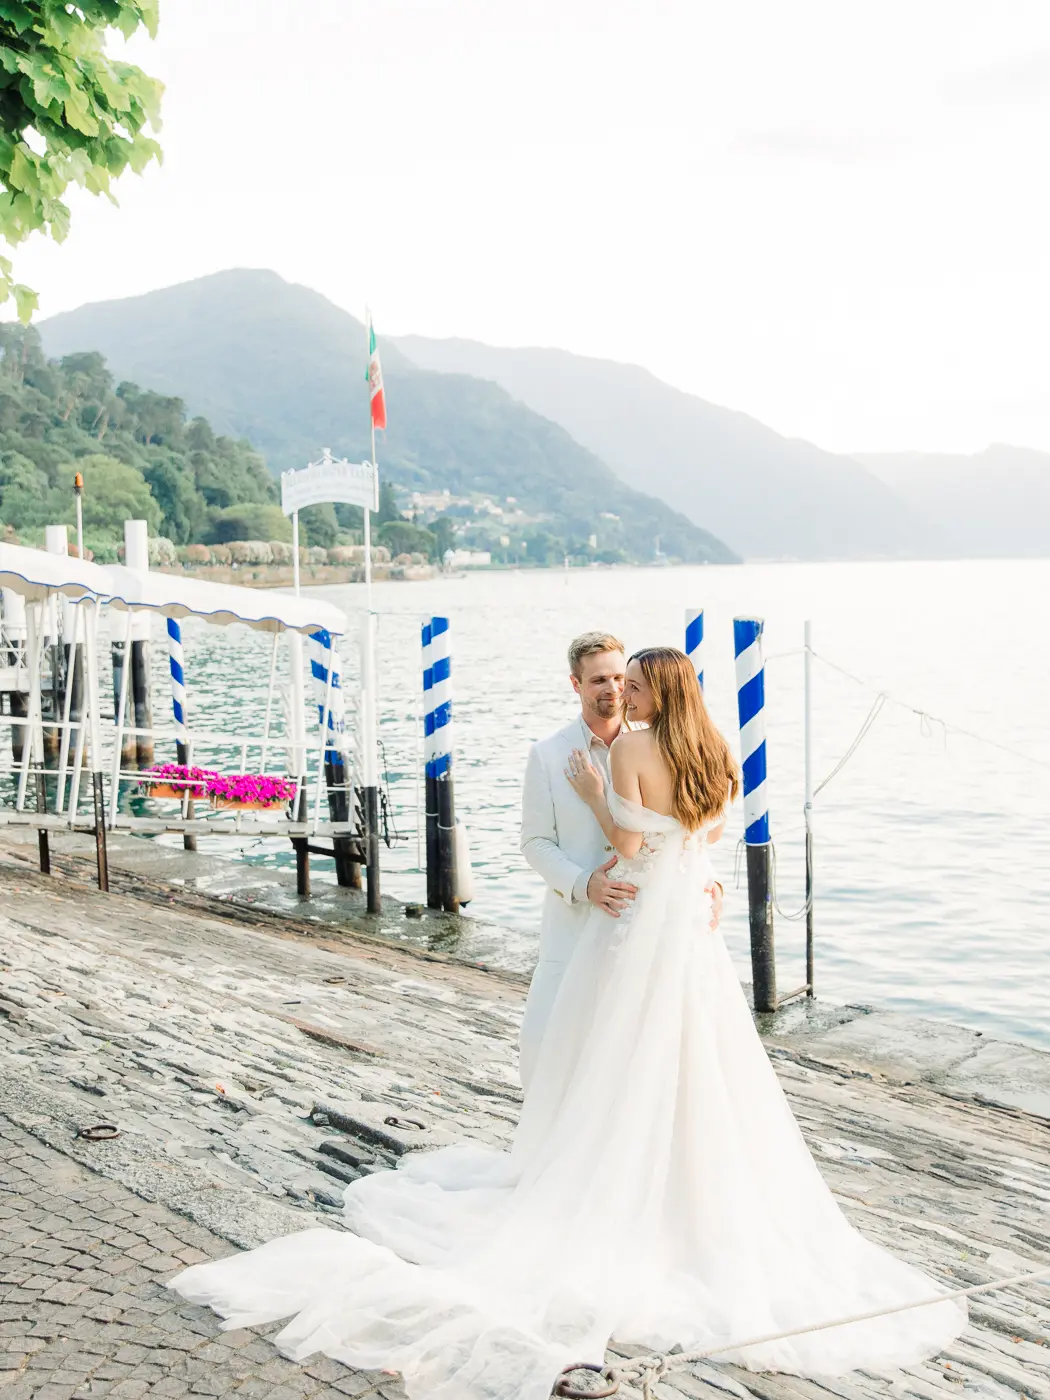 Romantic engagement moment on the shores of Lake Como, with the couple framed by the serene waters and distant mountains.